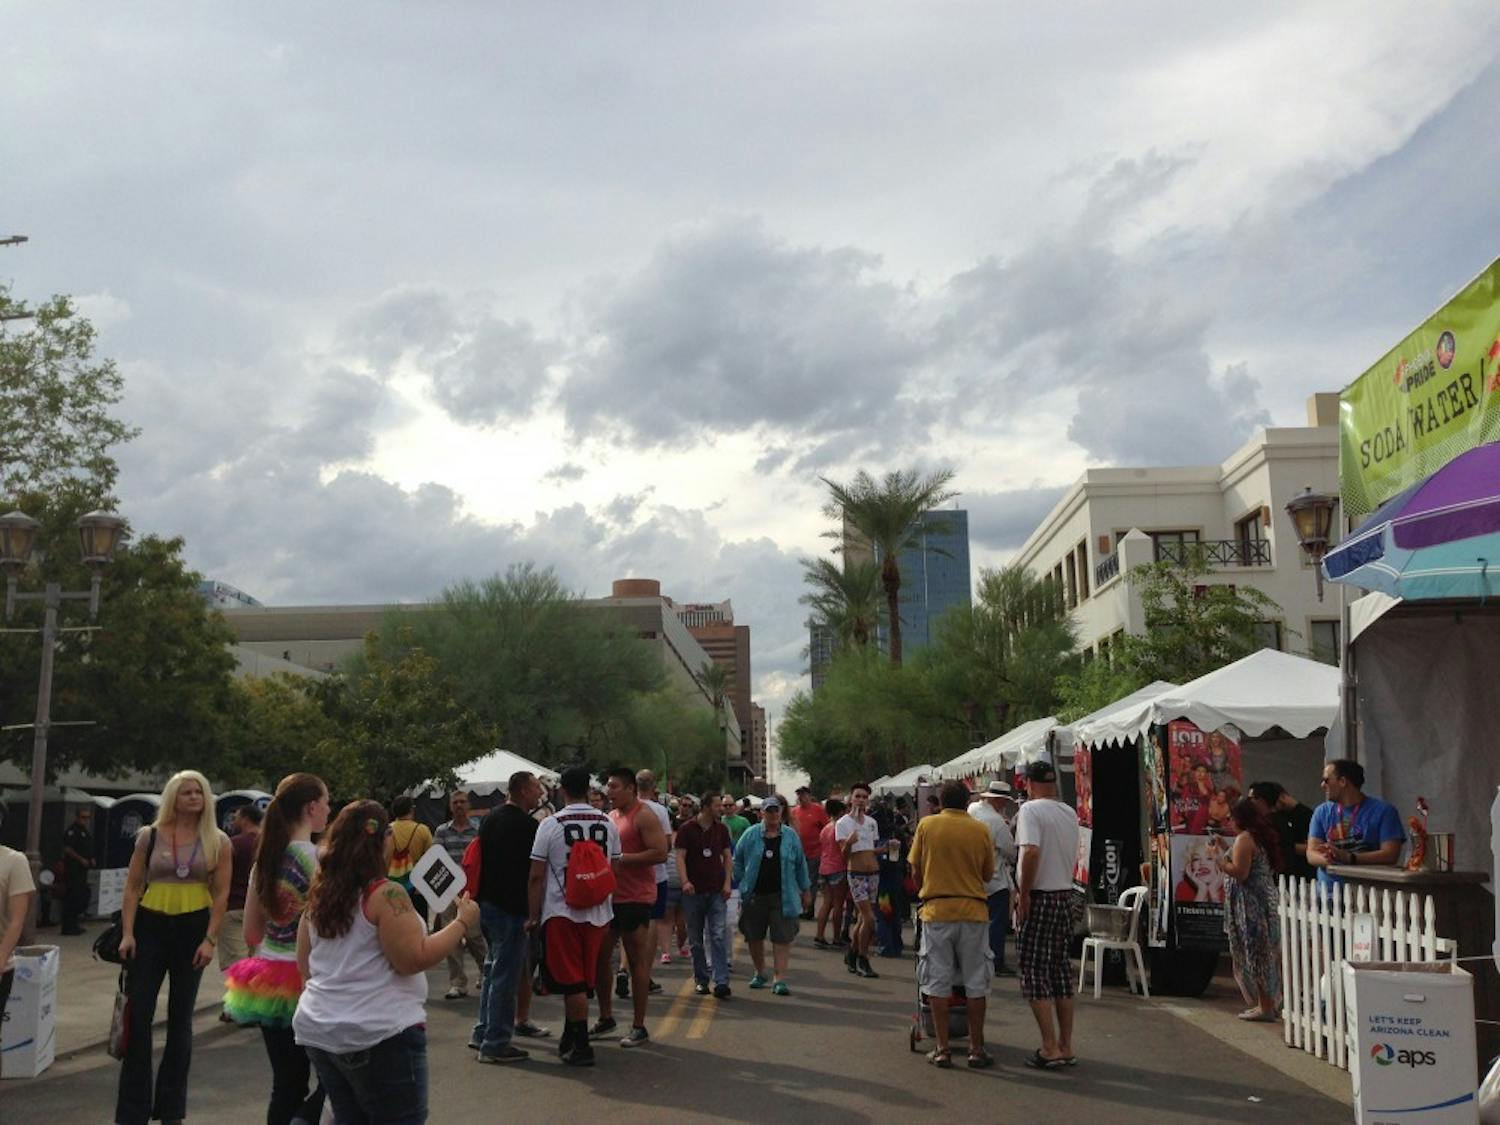 The 14th Annual Rainbows Festival &amp; Street Fair held in Phoenix on Sunday, Oct. 18, 2015.  (State Press/Kayla King-Sumner)